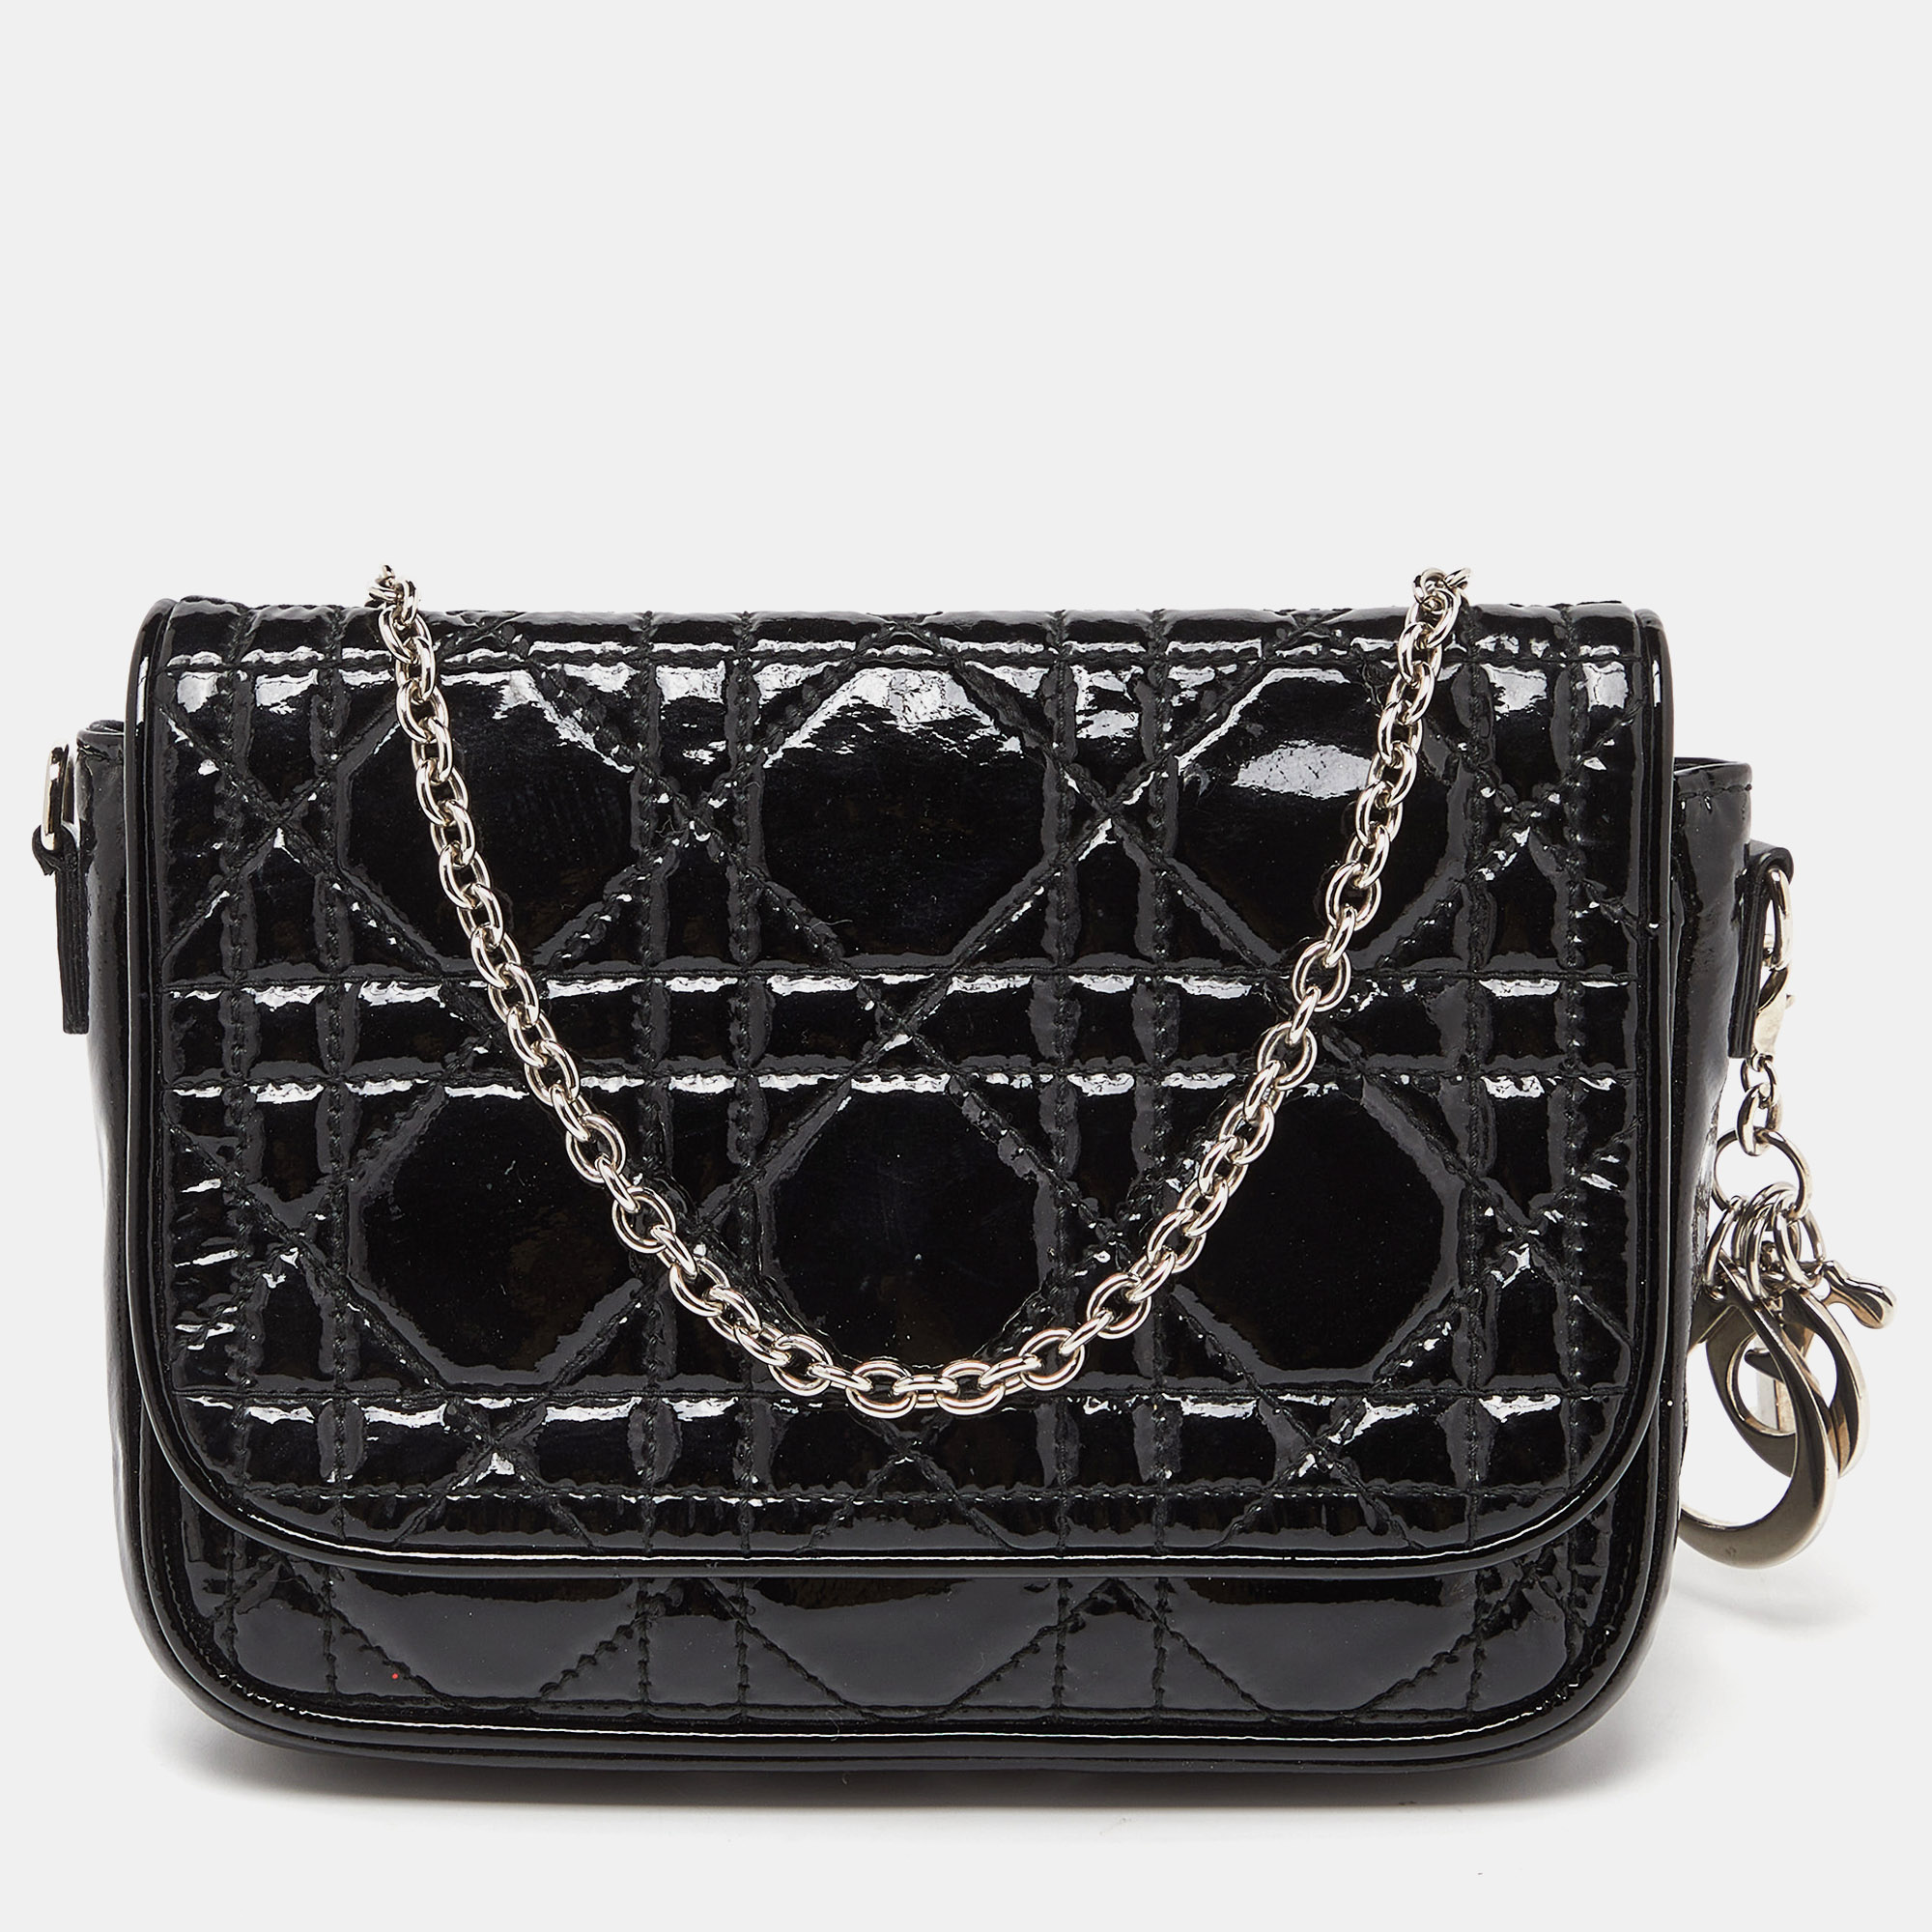 Dior black cannage patent leather lady dior chain crossbody bag